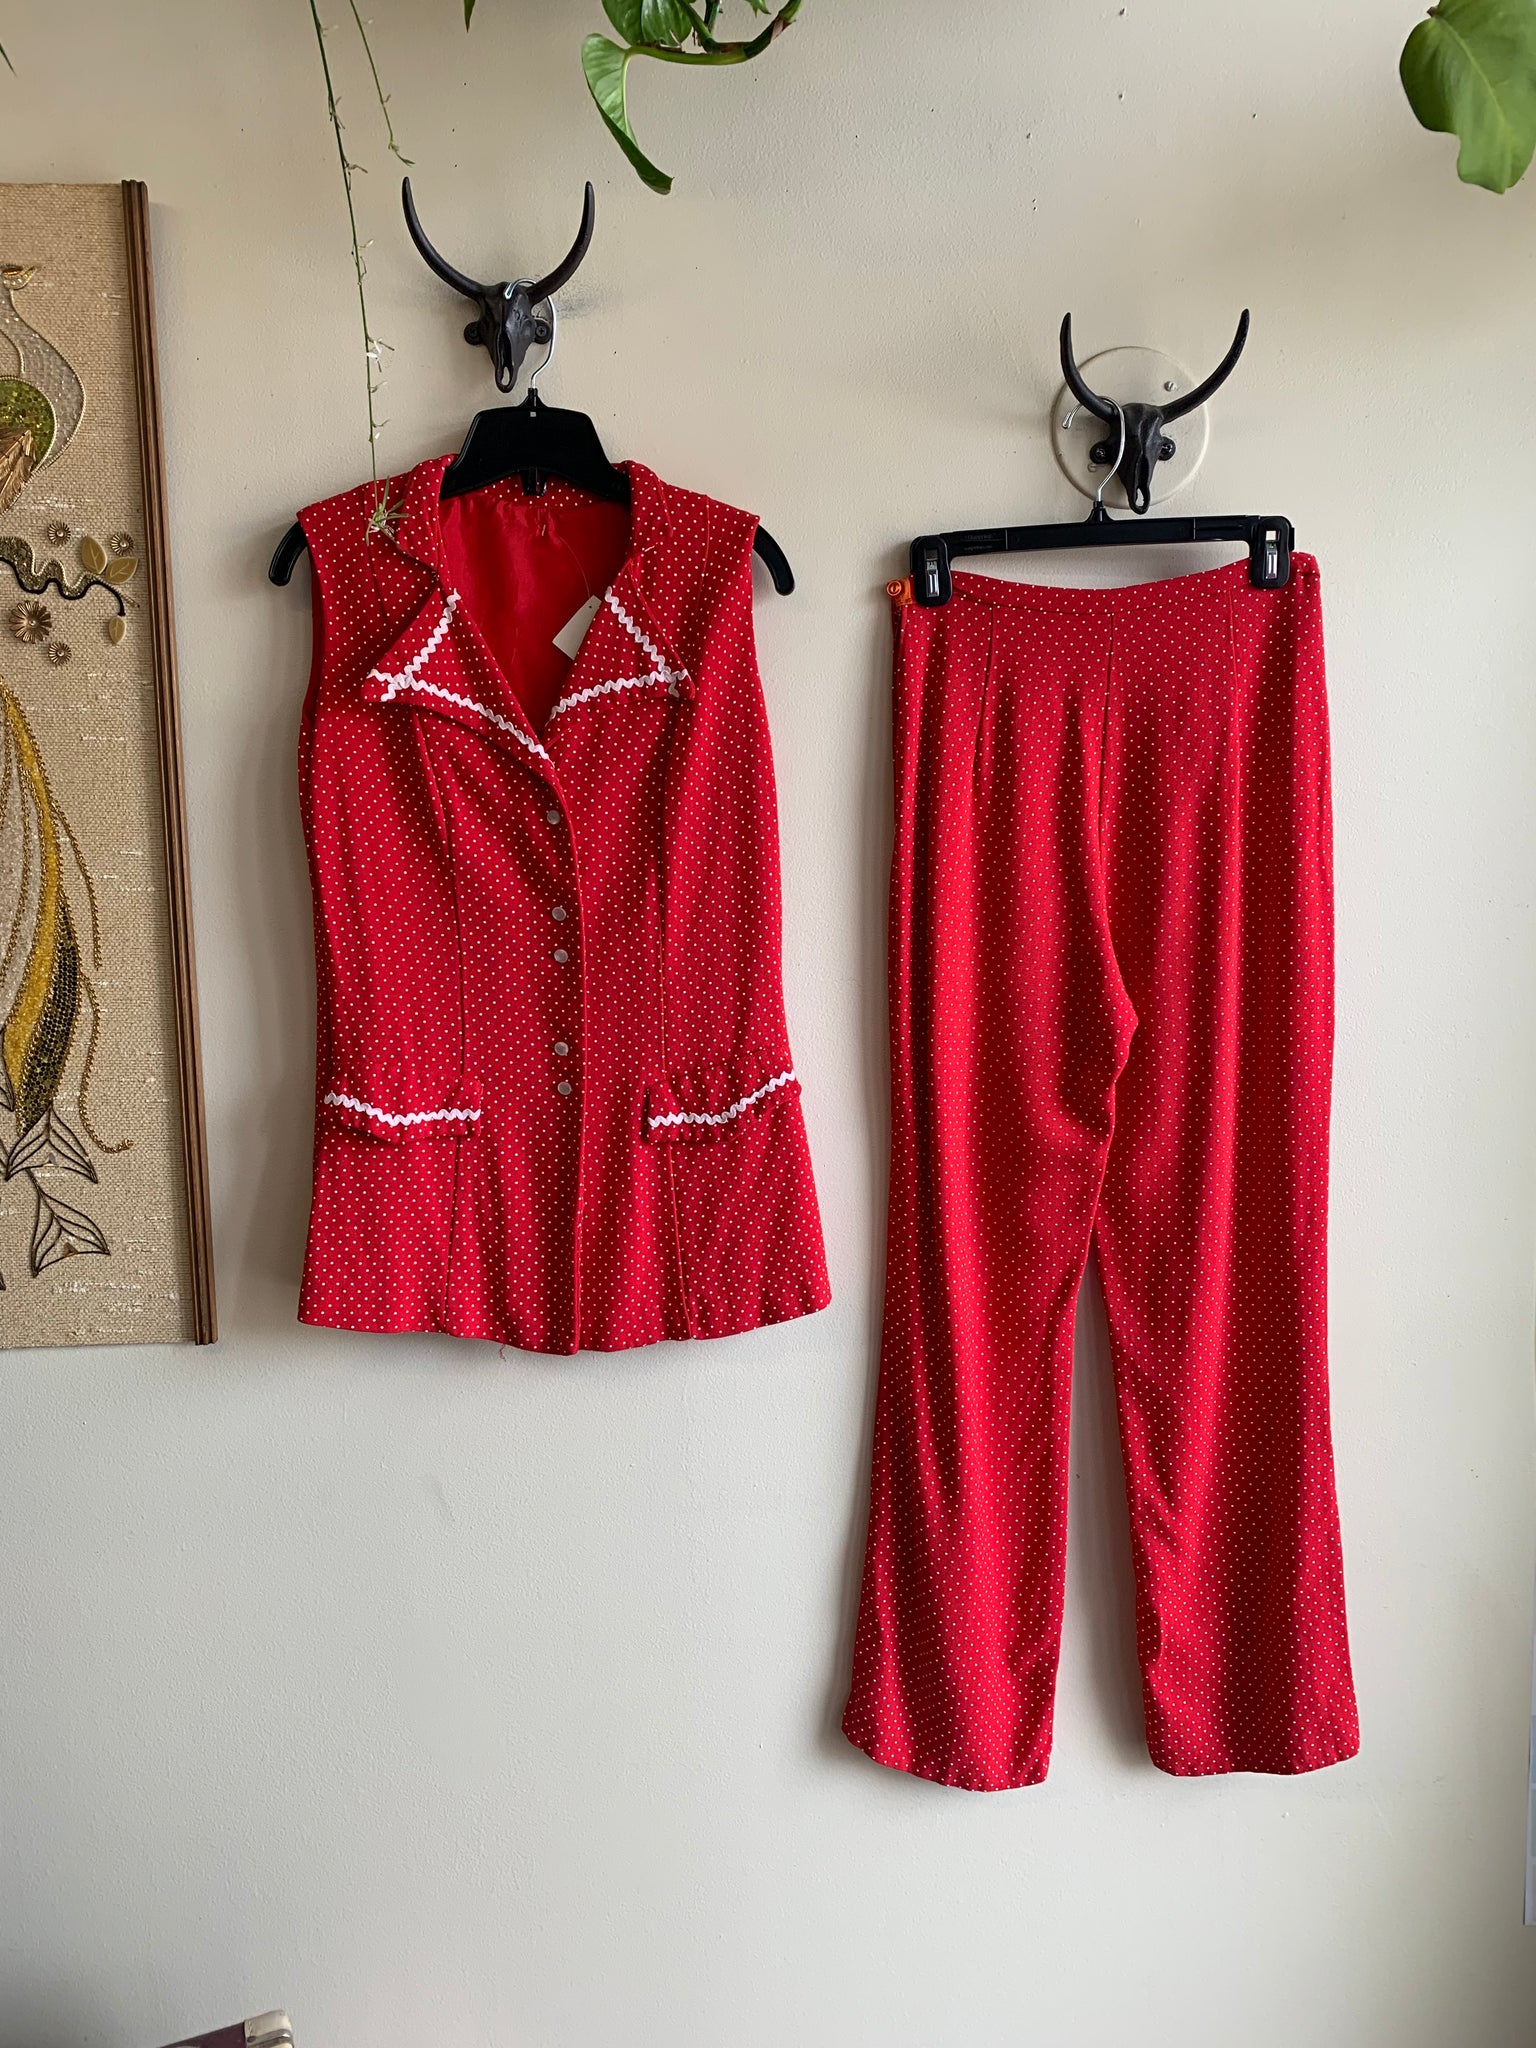 70s Red and White Polka Dot Set - S